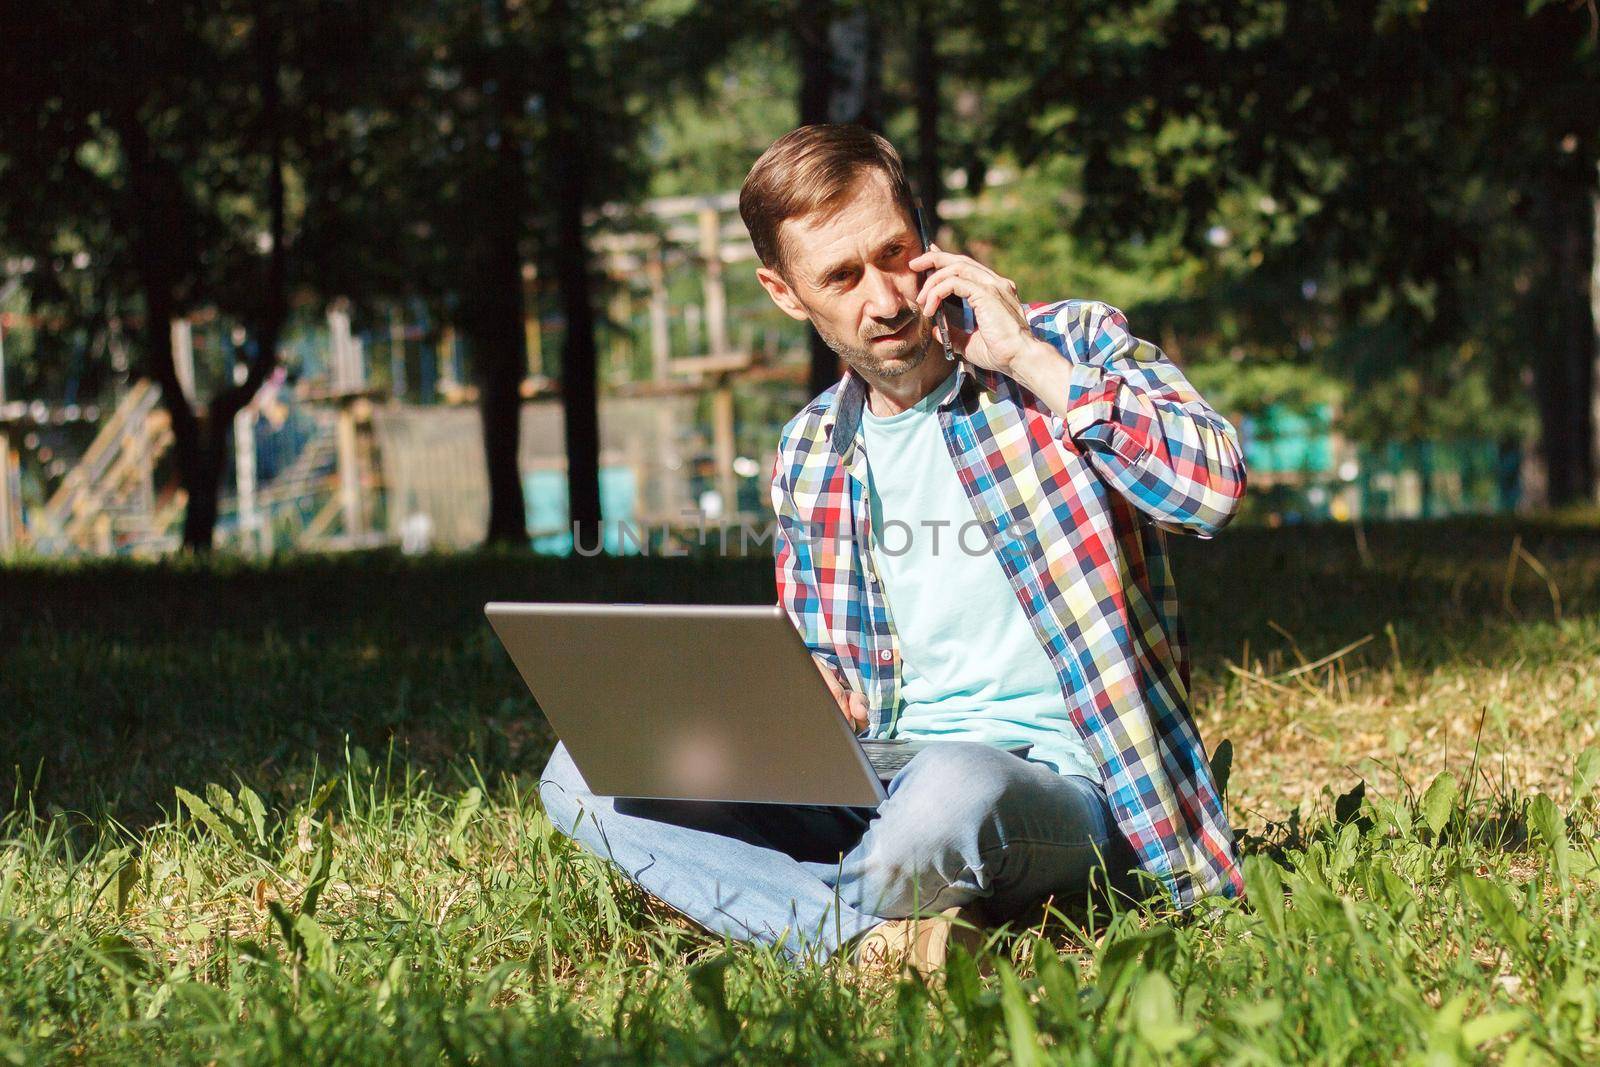 Adult man works on his computer in the park on the lawn.Remote work concept. The writer works remotely, enjoying nature. by lara29